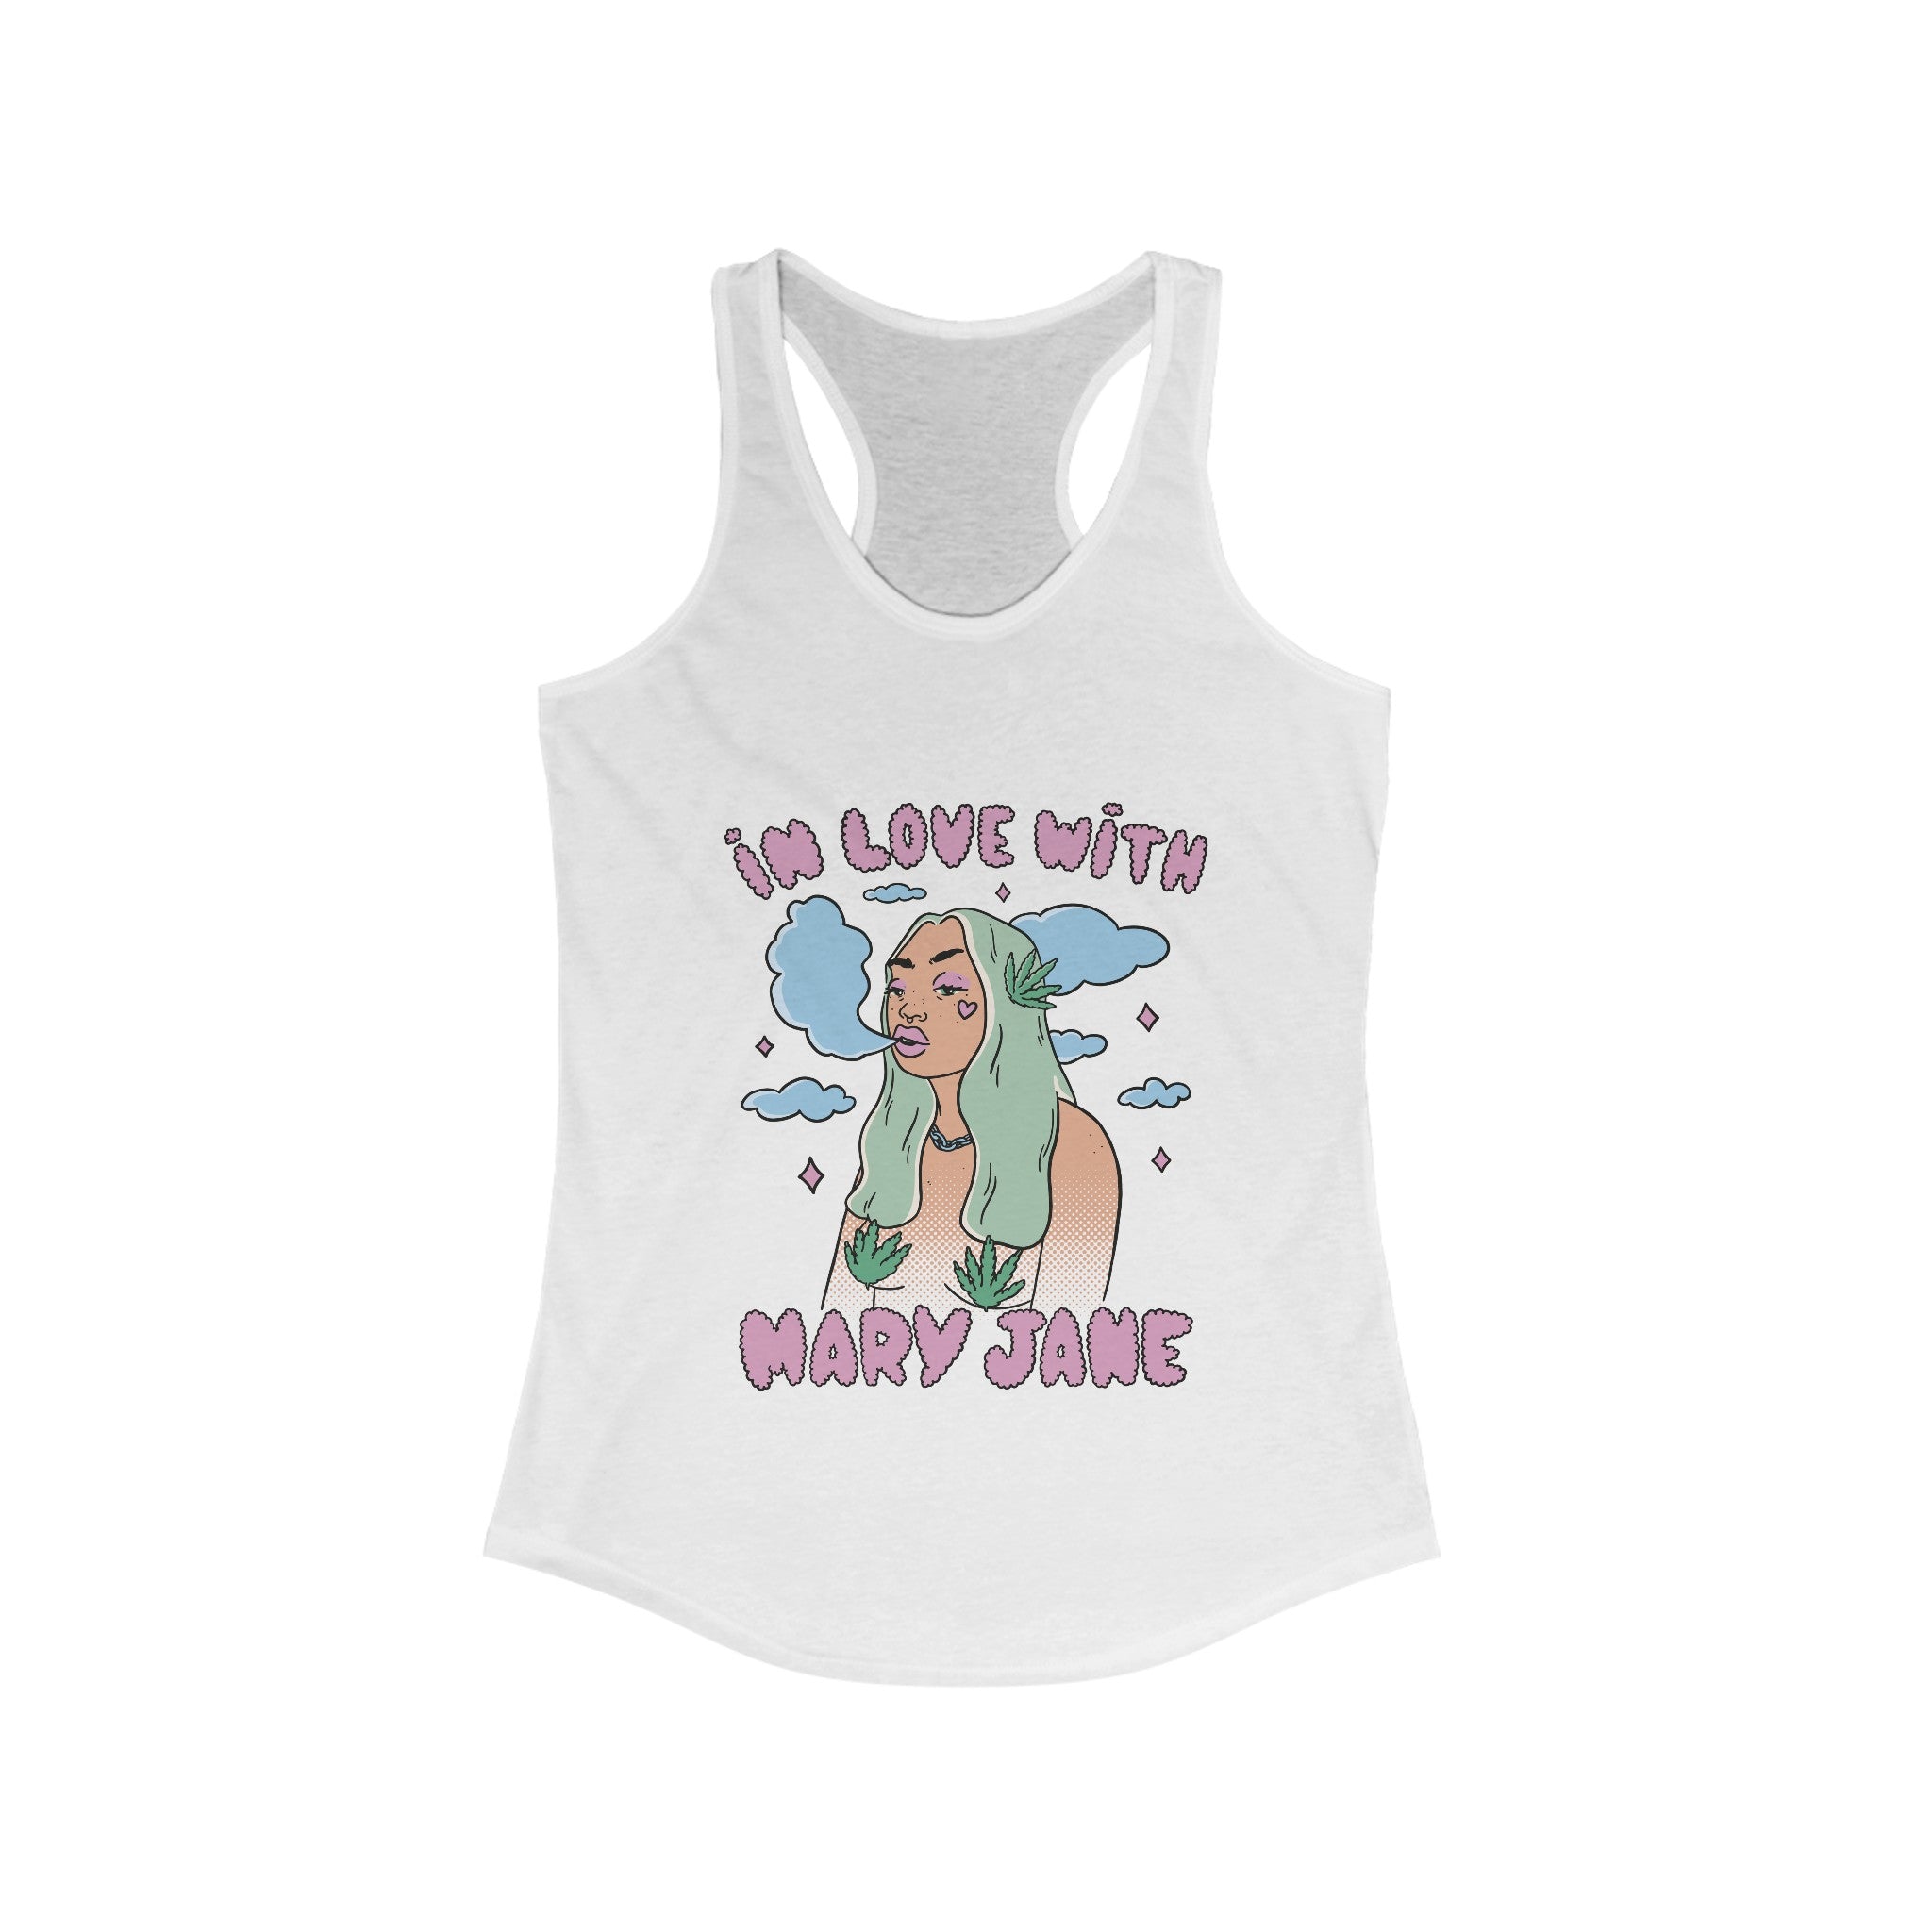 In Love with Mary Jane” Graphic Tank Top - TRU2 Clothing